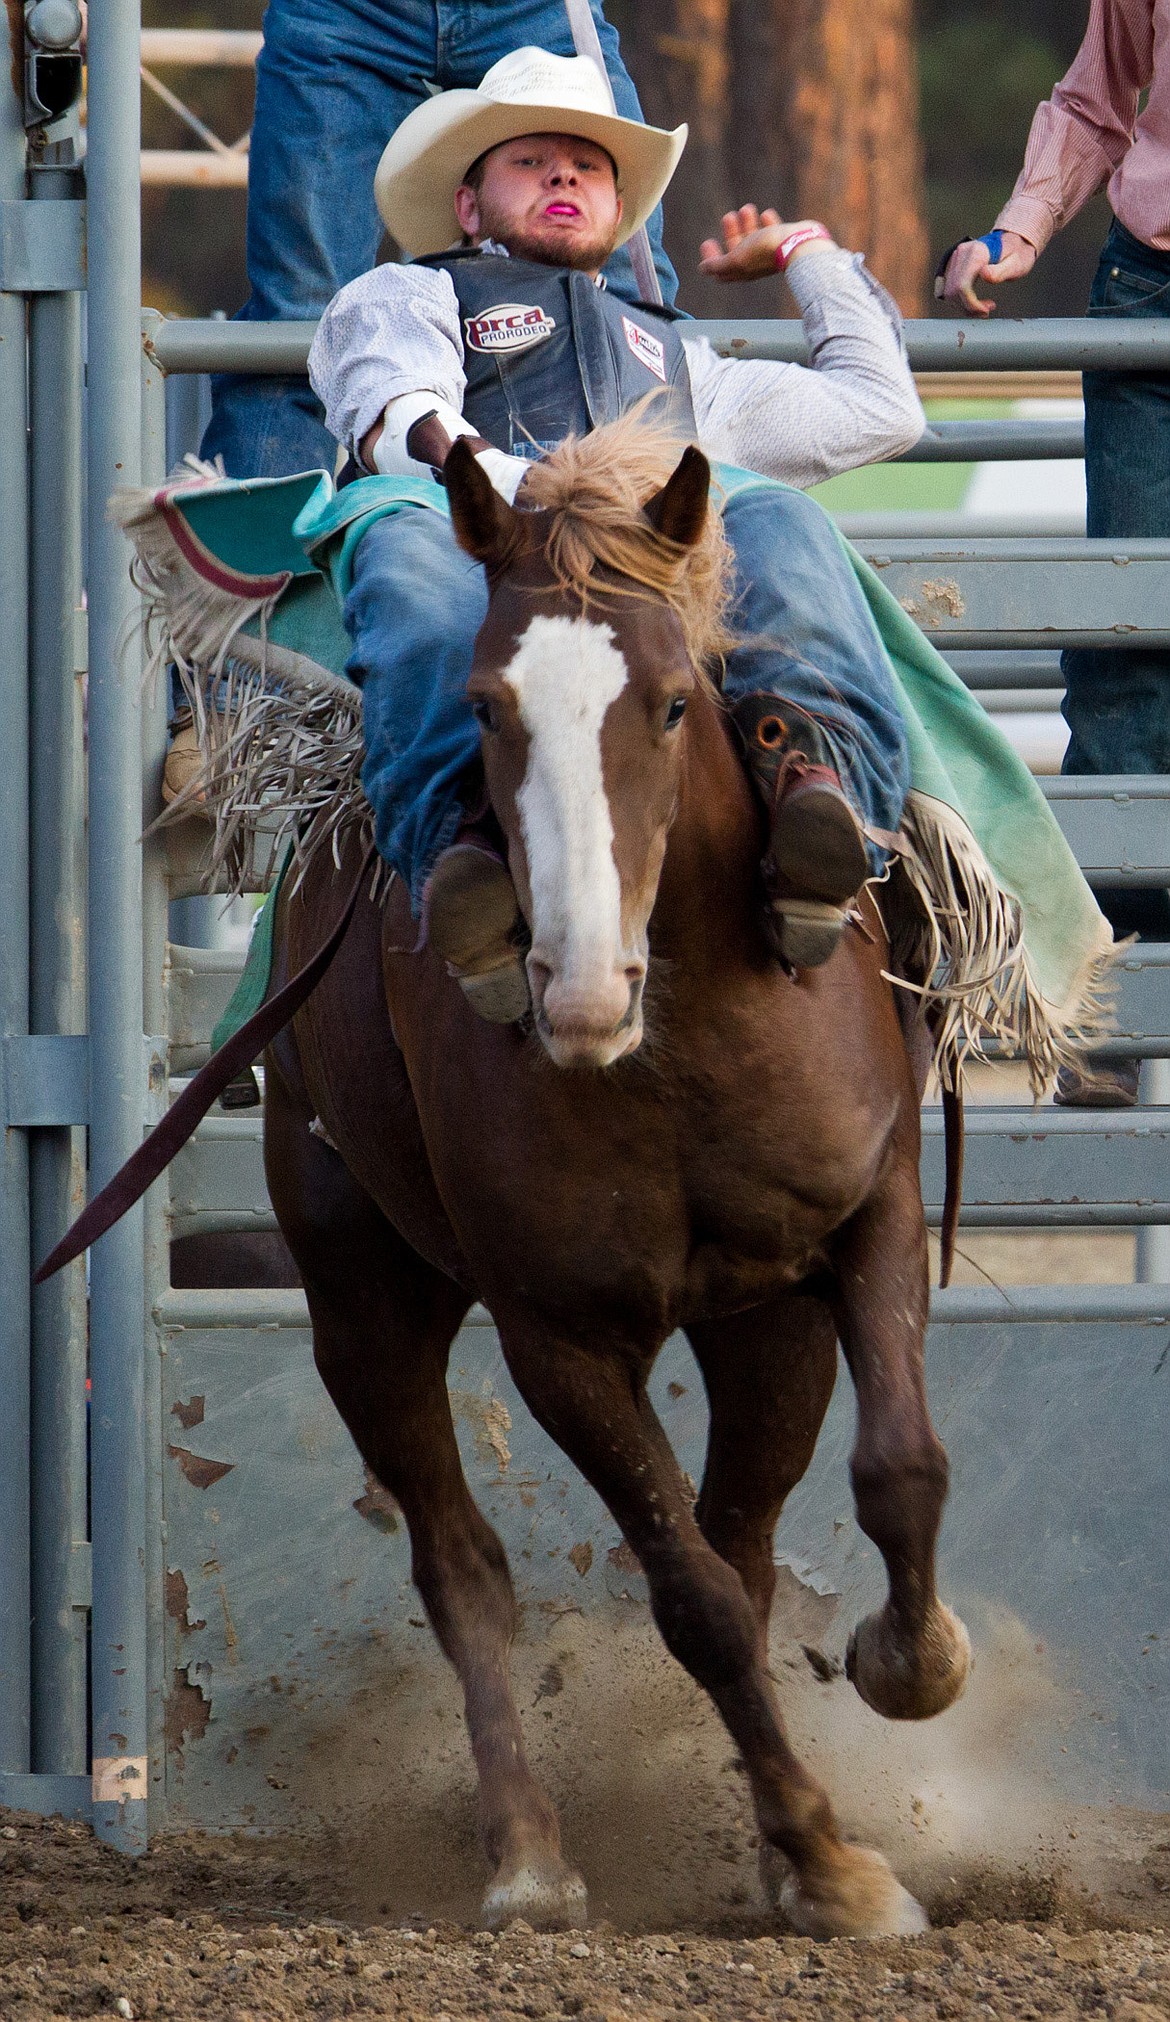 Skyler Erickson of Powell, Wyoming competes in the bareback riding event at the Kootenai River Stampede PRCA Rodeo in Libby Saturday, Aug. 5, 2017. (John Blodgett/The Western News file photo)